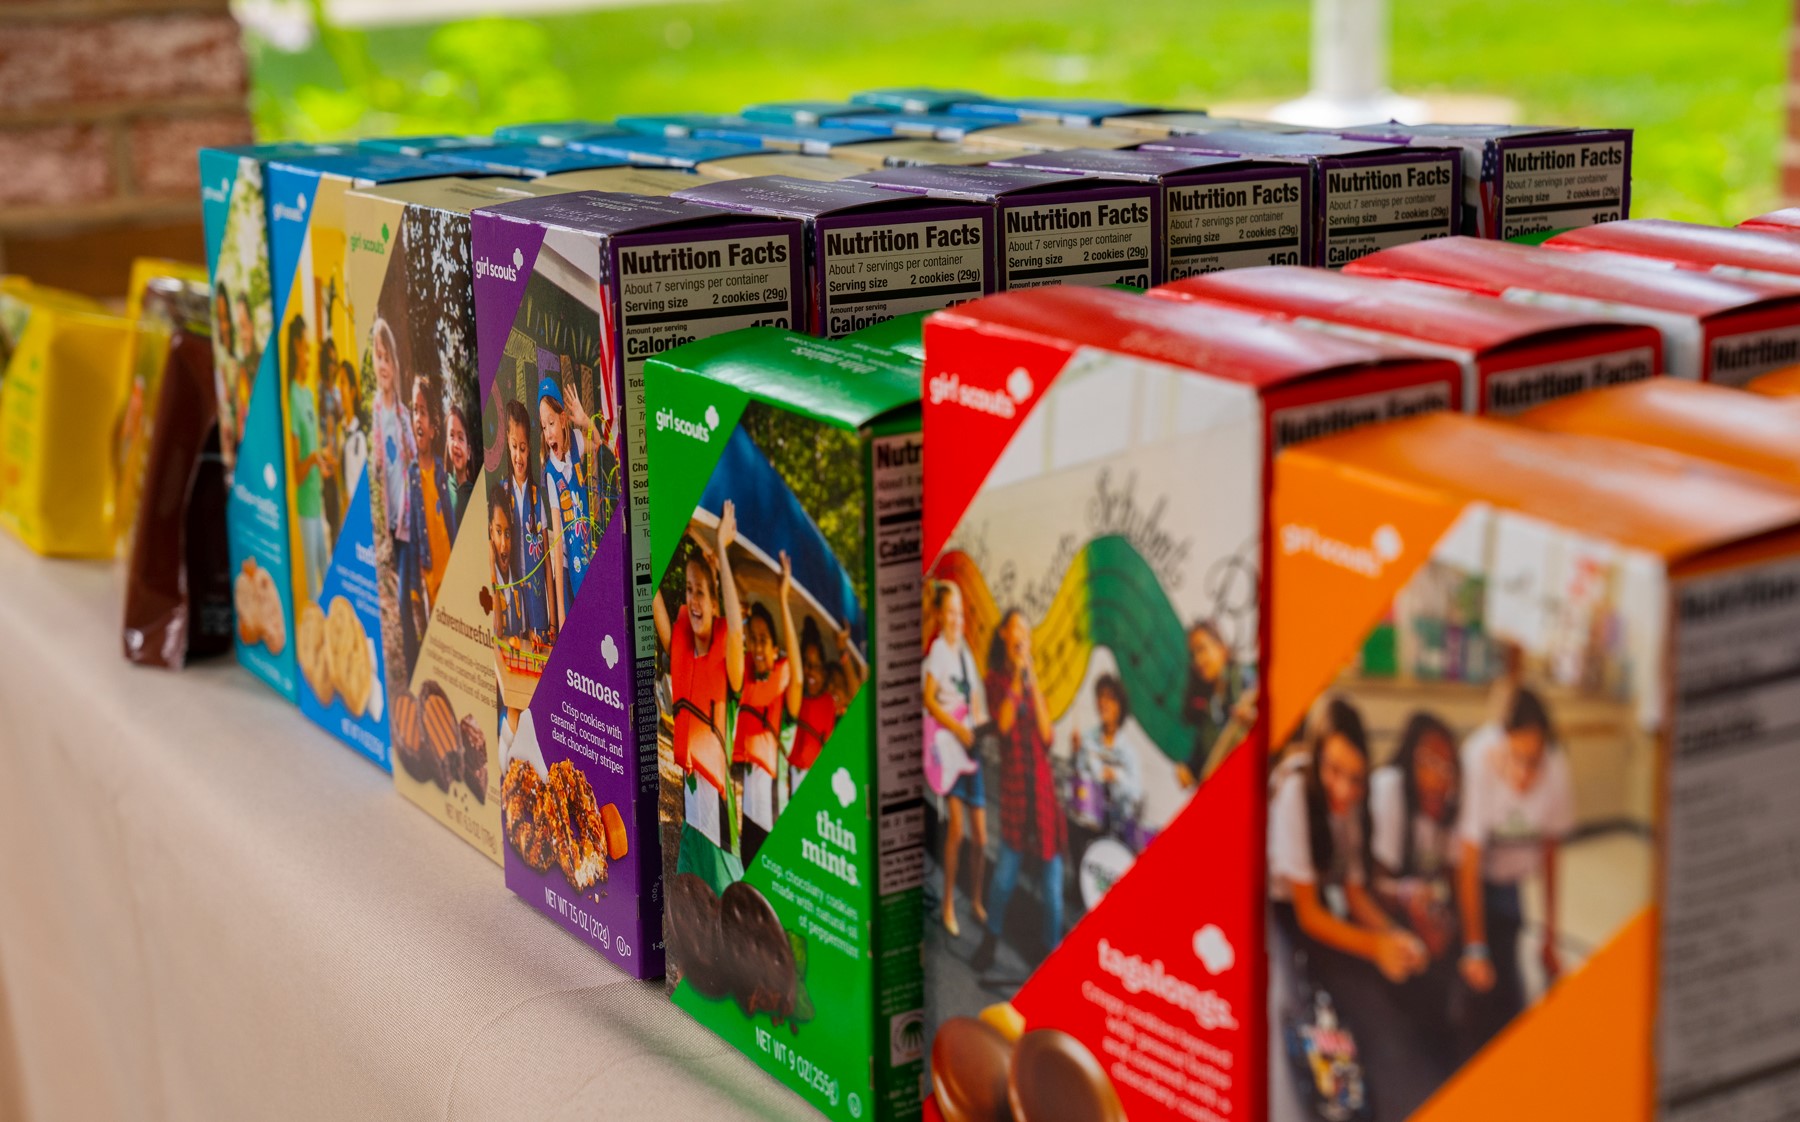 Raspberry Rally Girl Scout Cookie Boxes Selling on  at High Prices